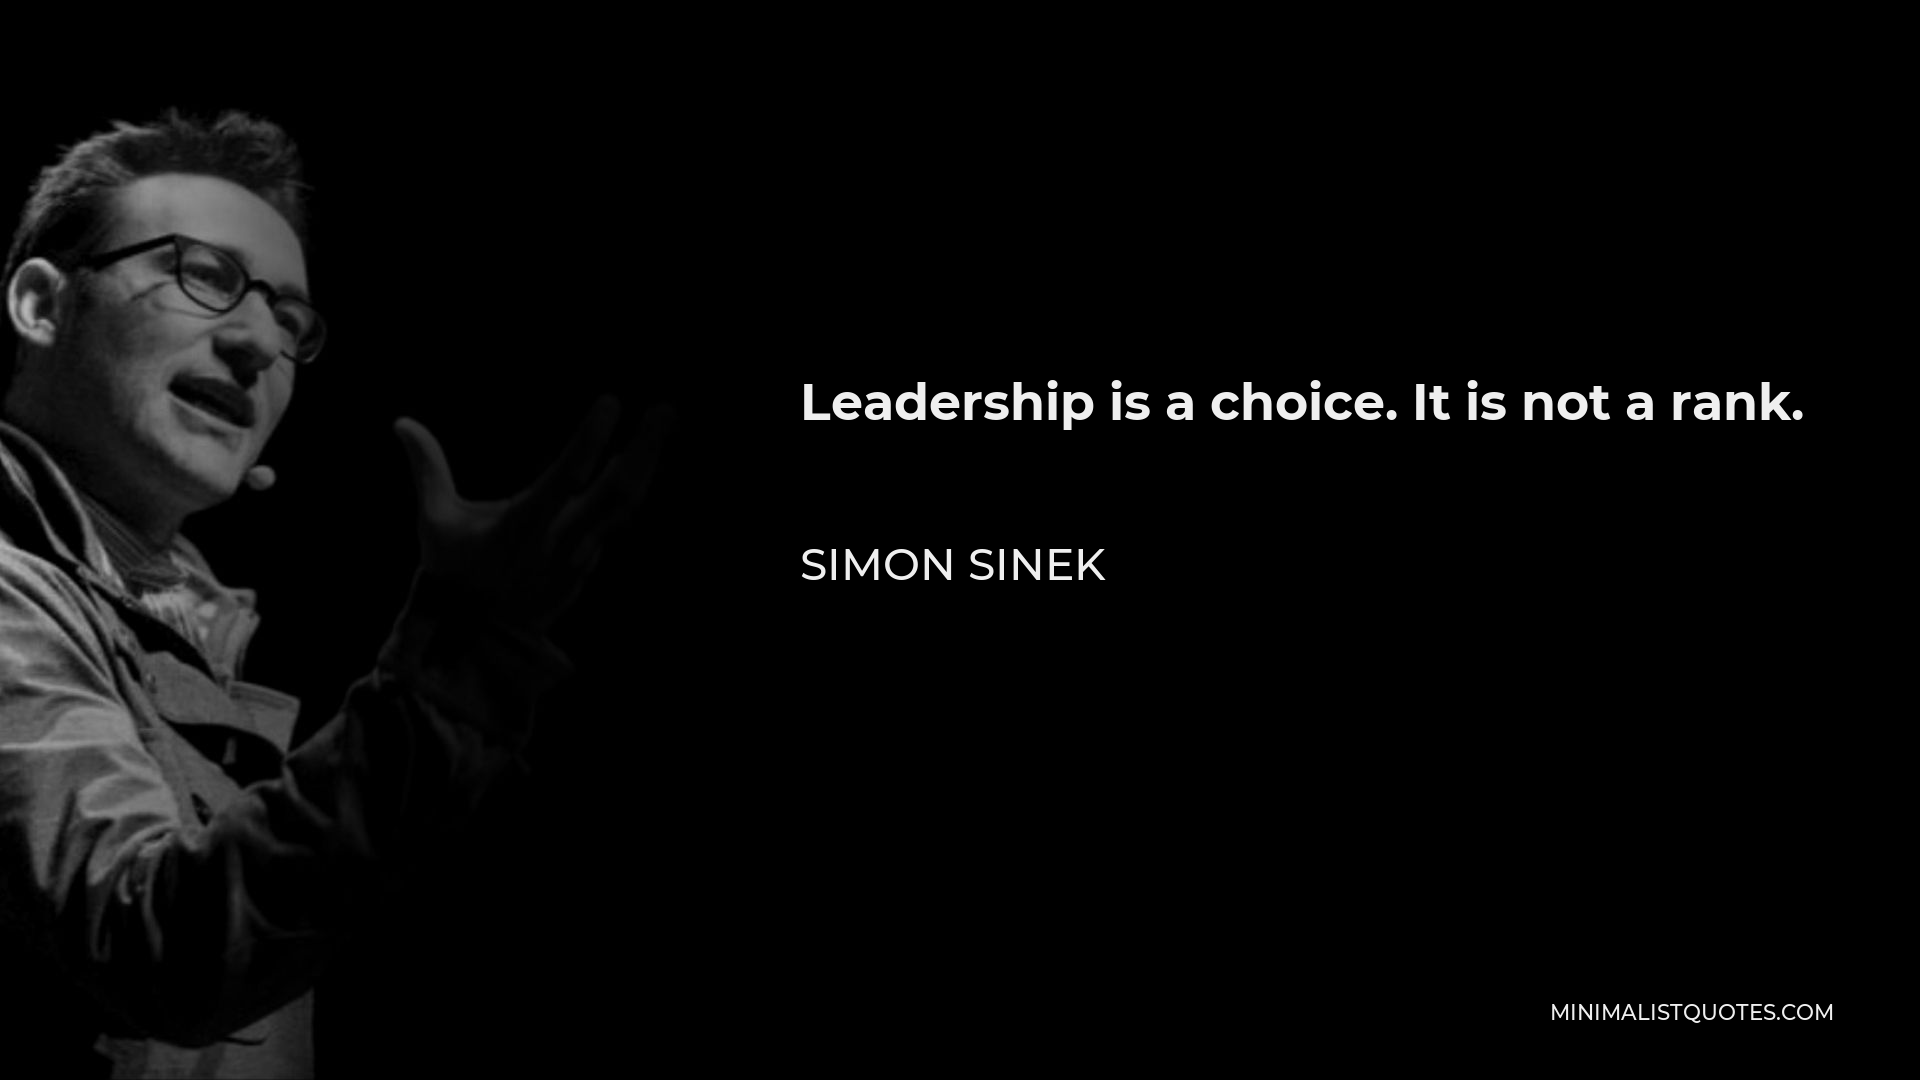 Simon Sinek Quote - Leadership is a choice. It is not a rank.